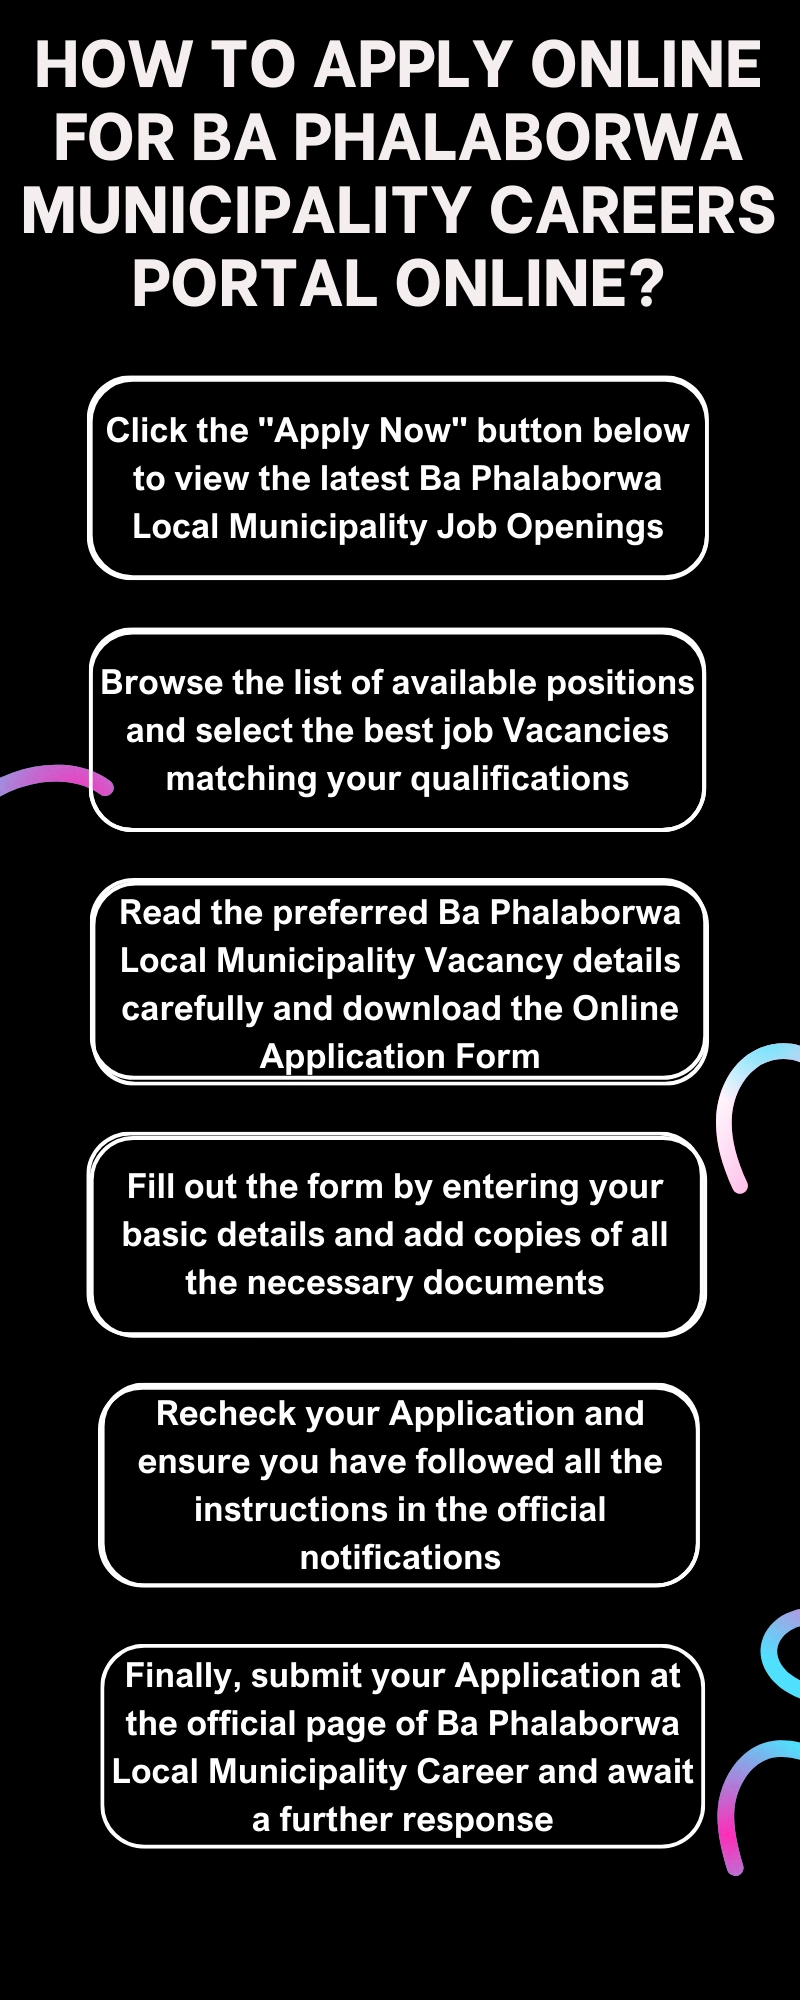 How to Apply online for Ba Phalaborwa Municipality Careers Portal Online?